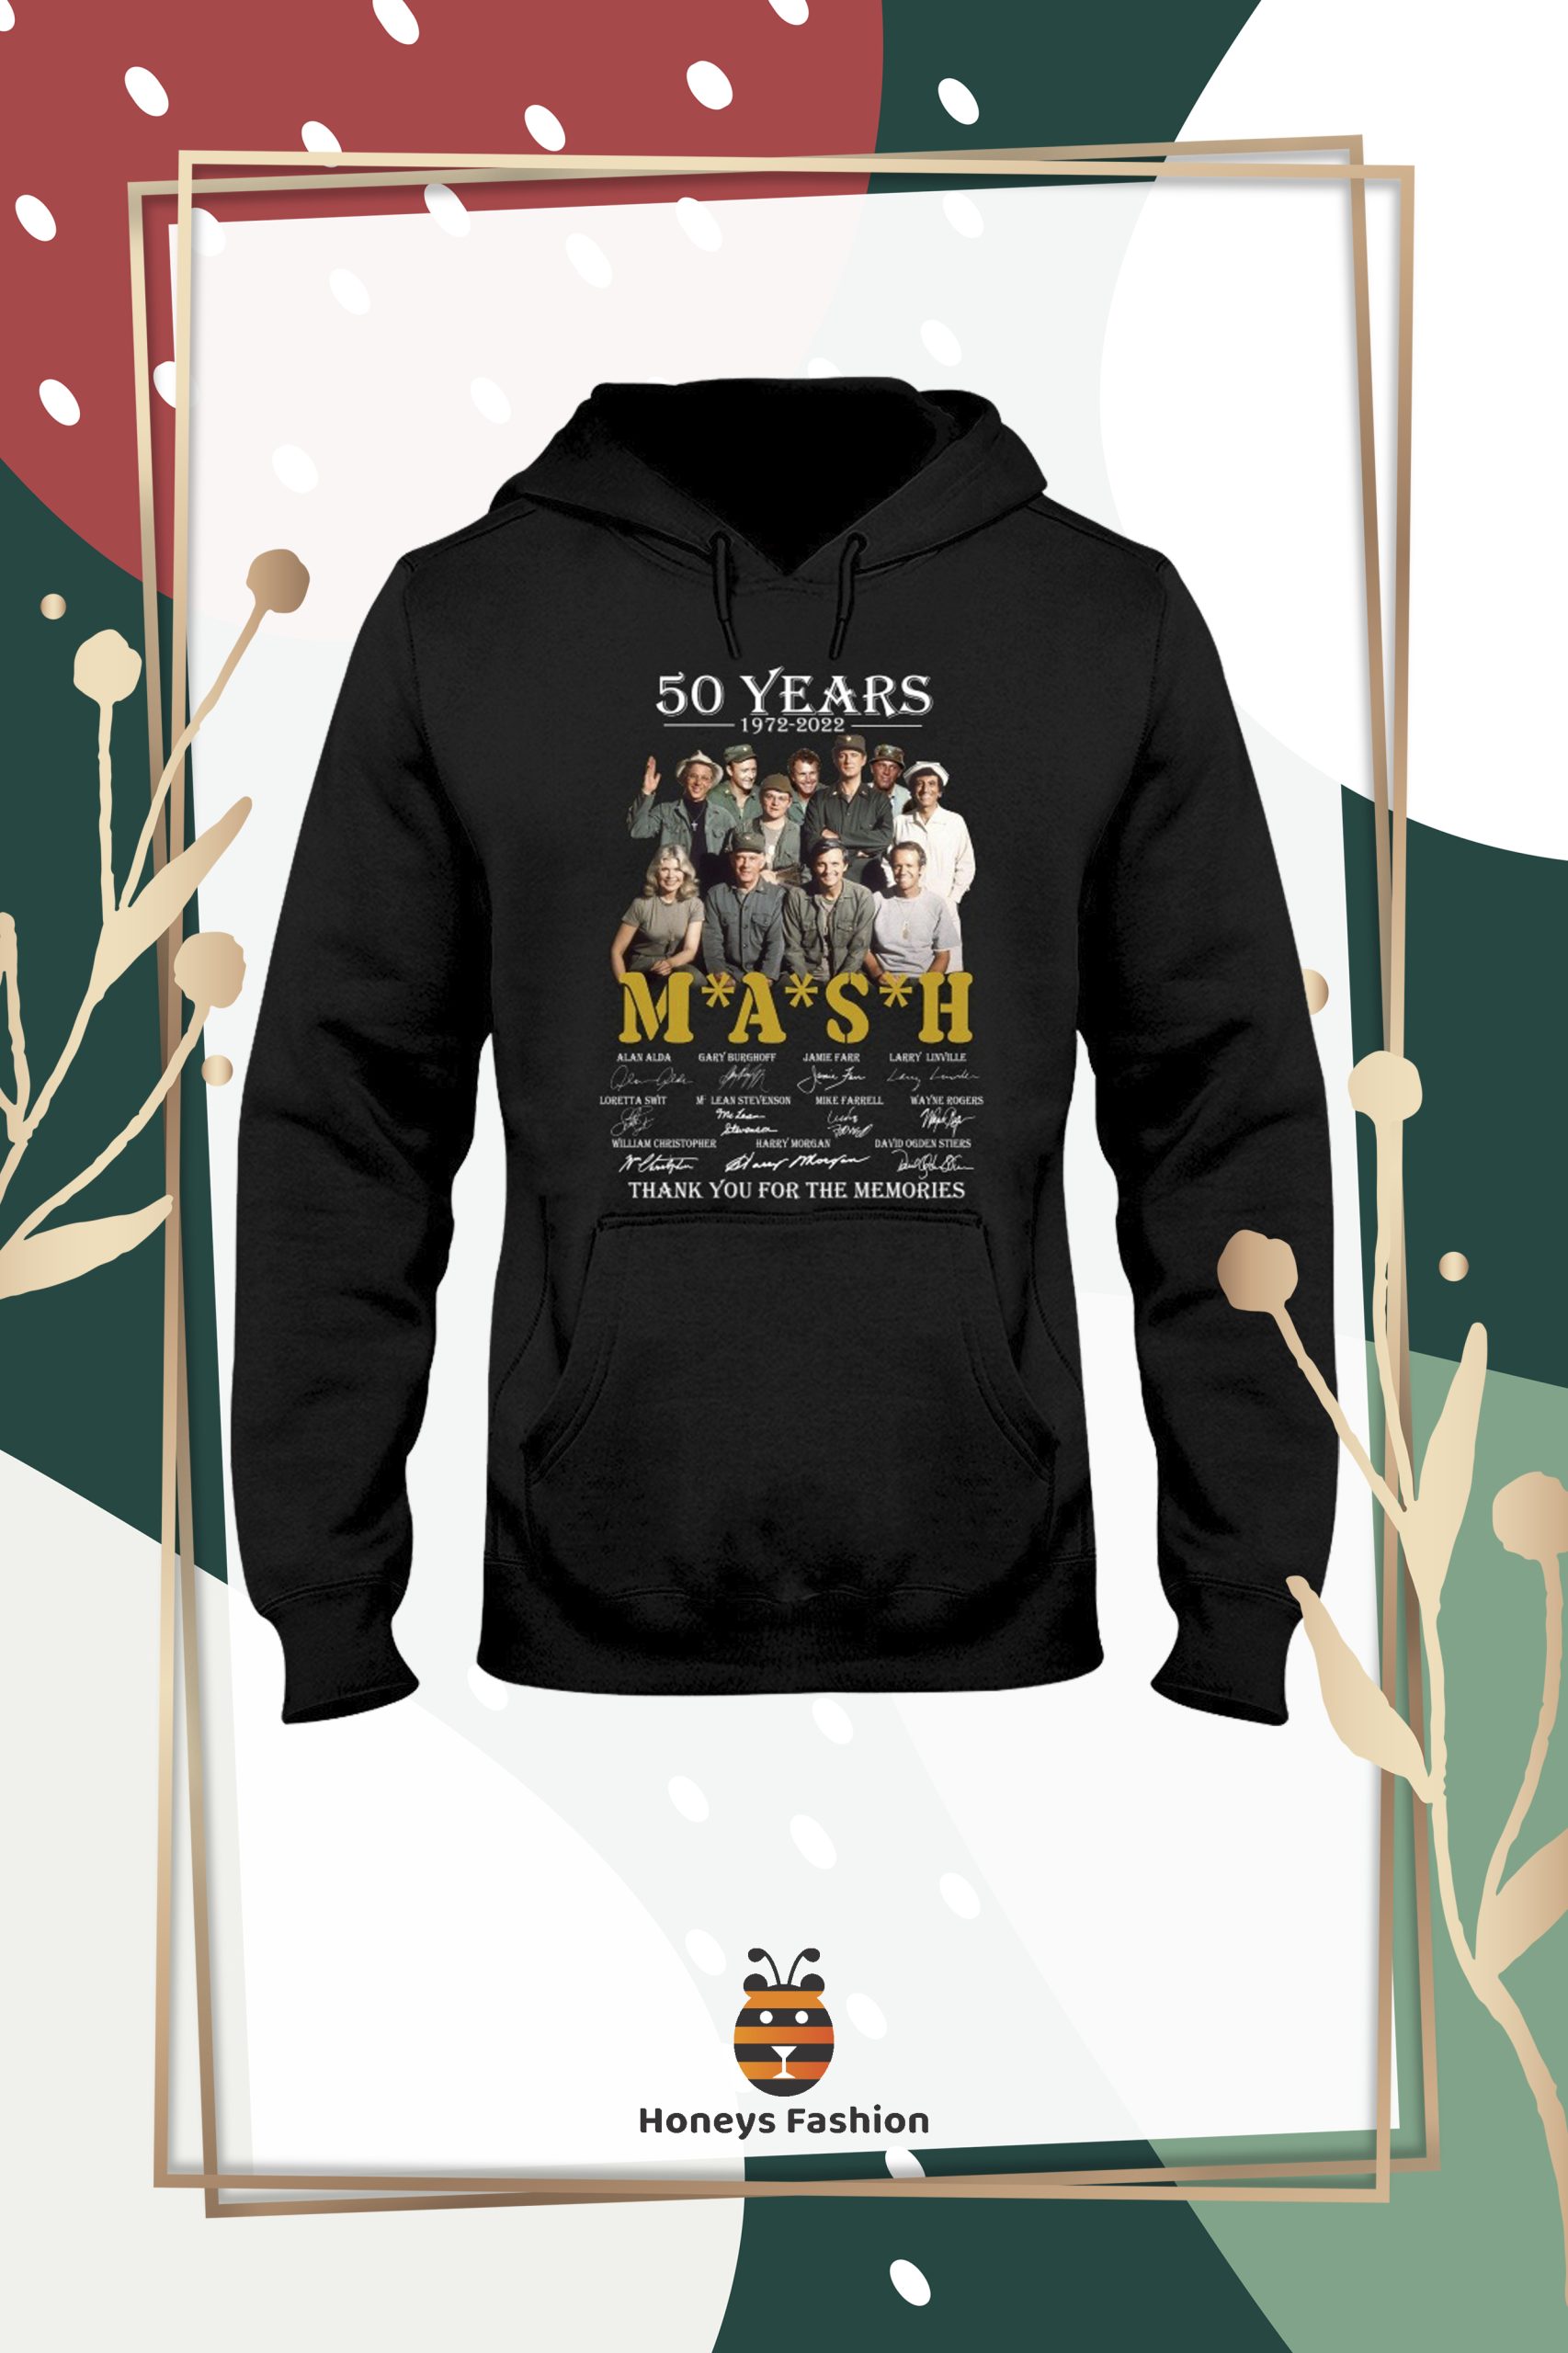 MASH 50 Years Thank You For The Memories Signature shirt hoodie